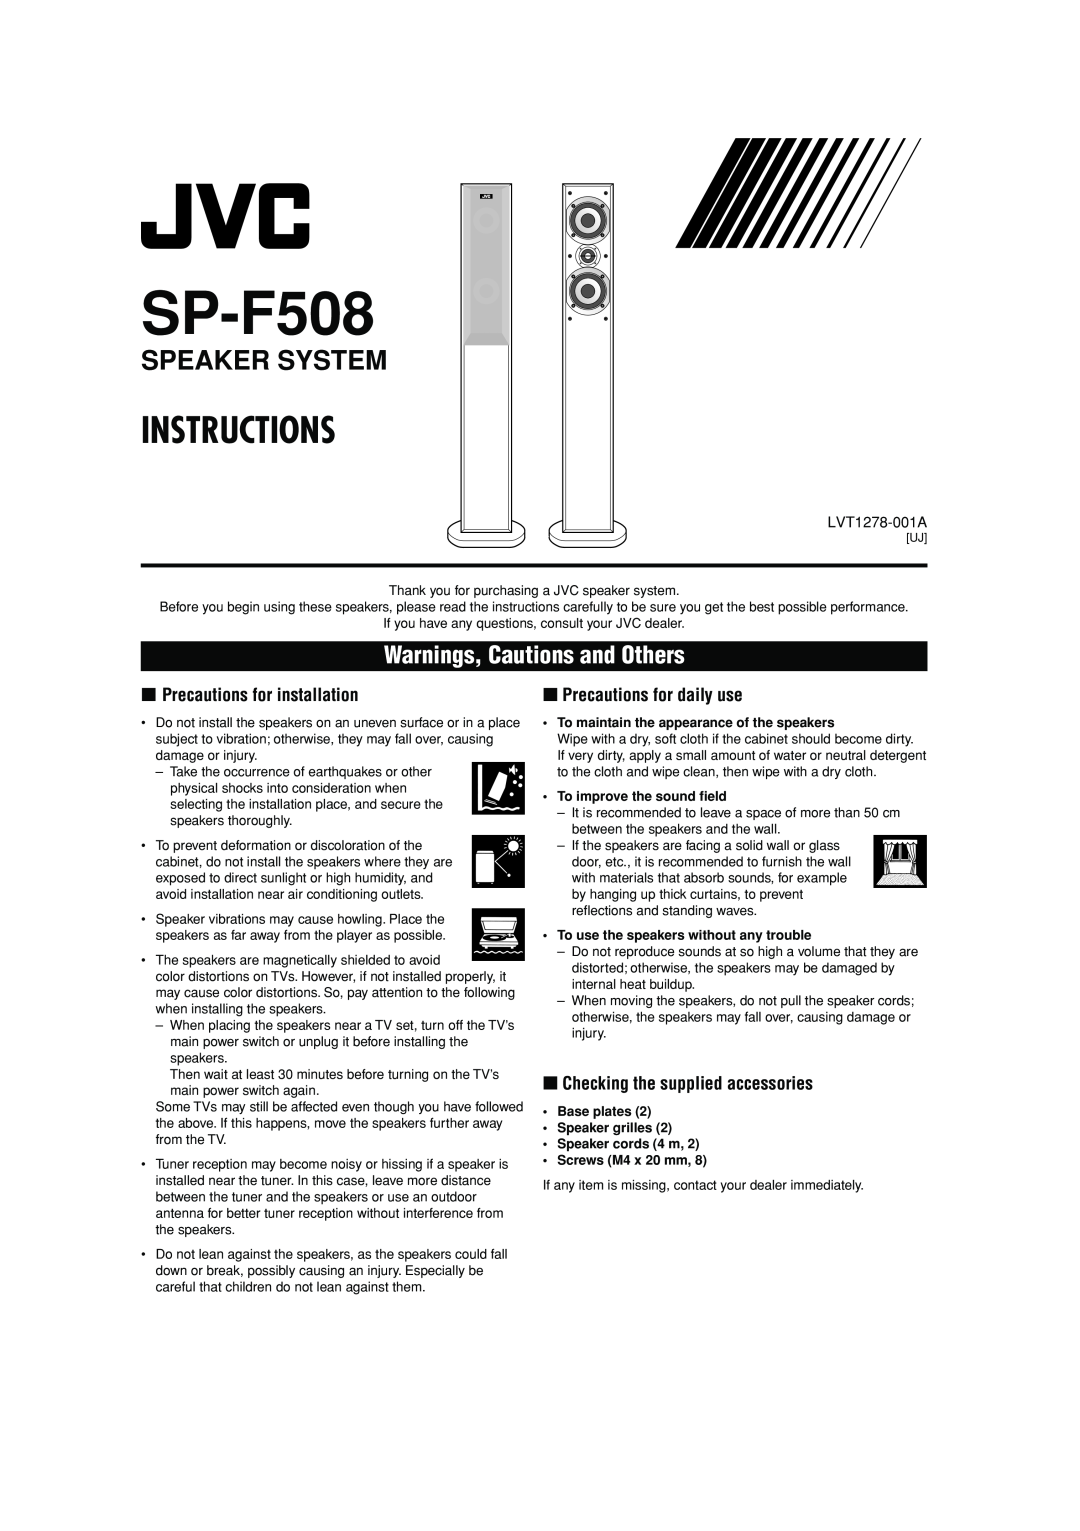 JVC SP-F508 manual Speaker System, Warnings, Cautions and Others, 7Precautions for installation, Instructions 